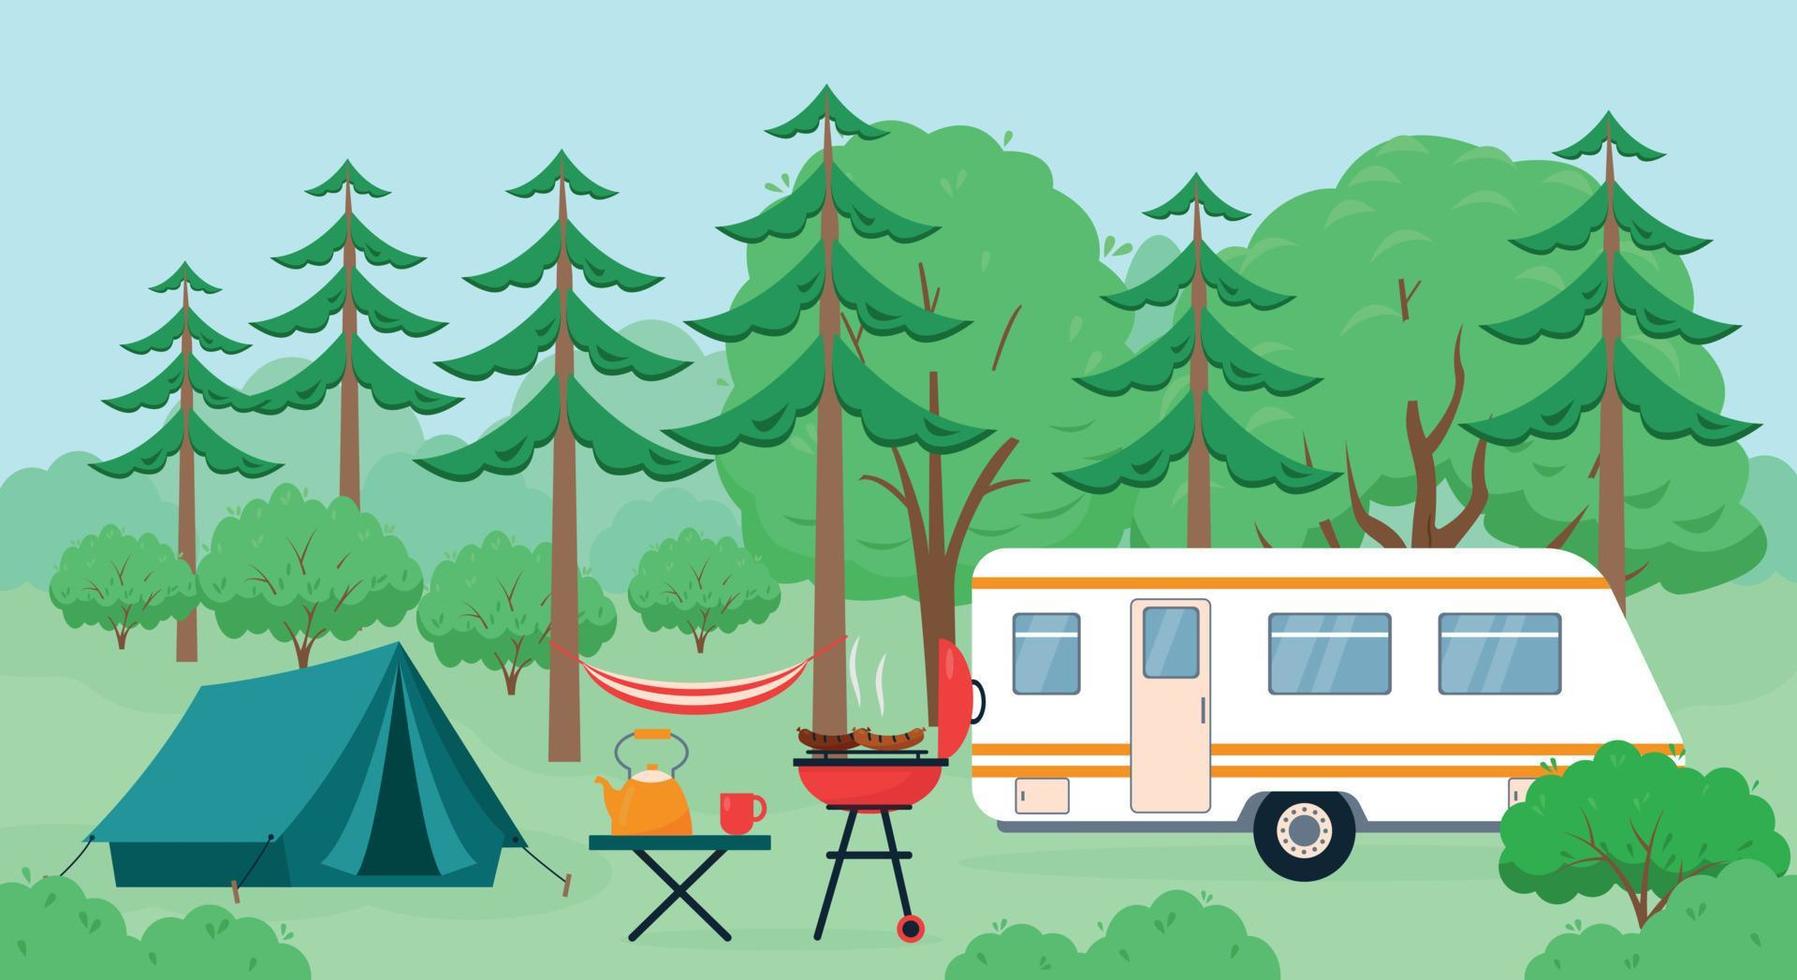 Summer or spring landscape with forest, hammock, camping tents and trailer. Tourist Camping concept. Vector banner or poster illustration.